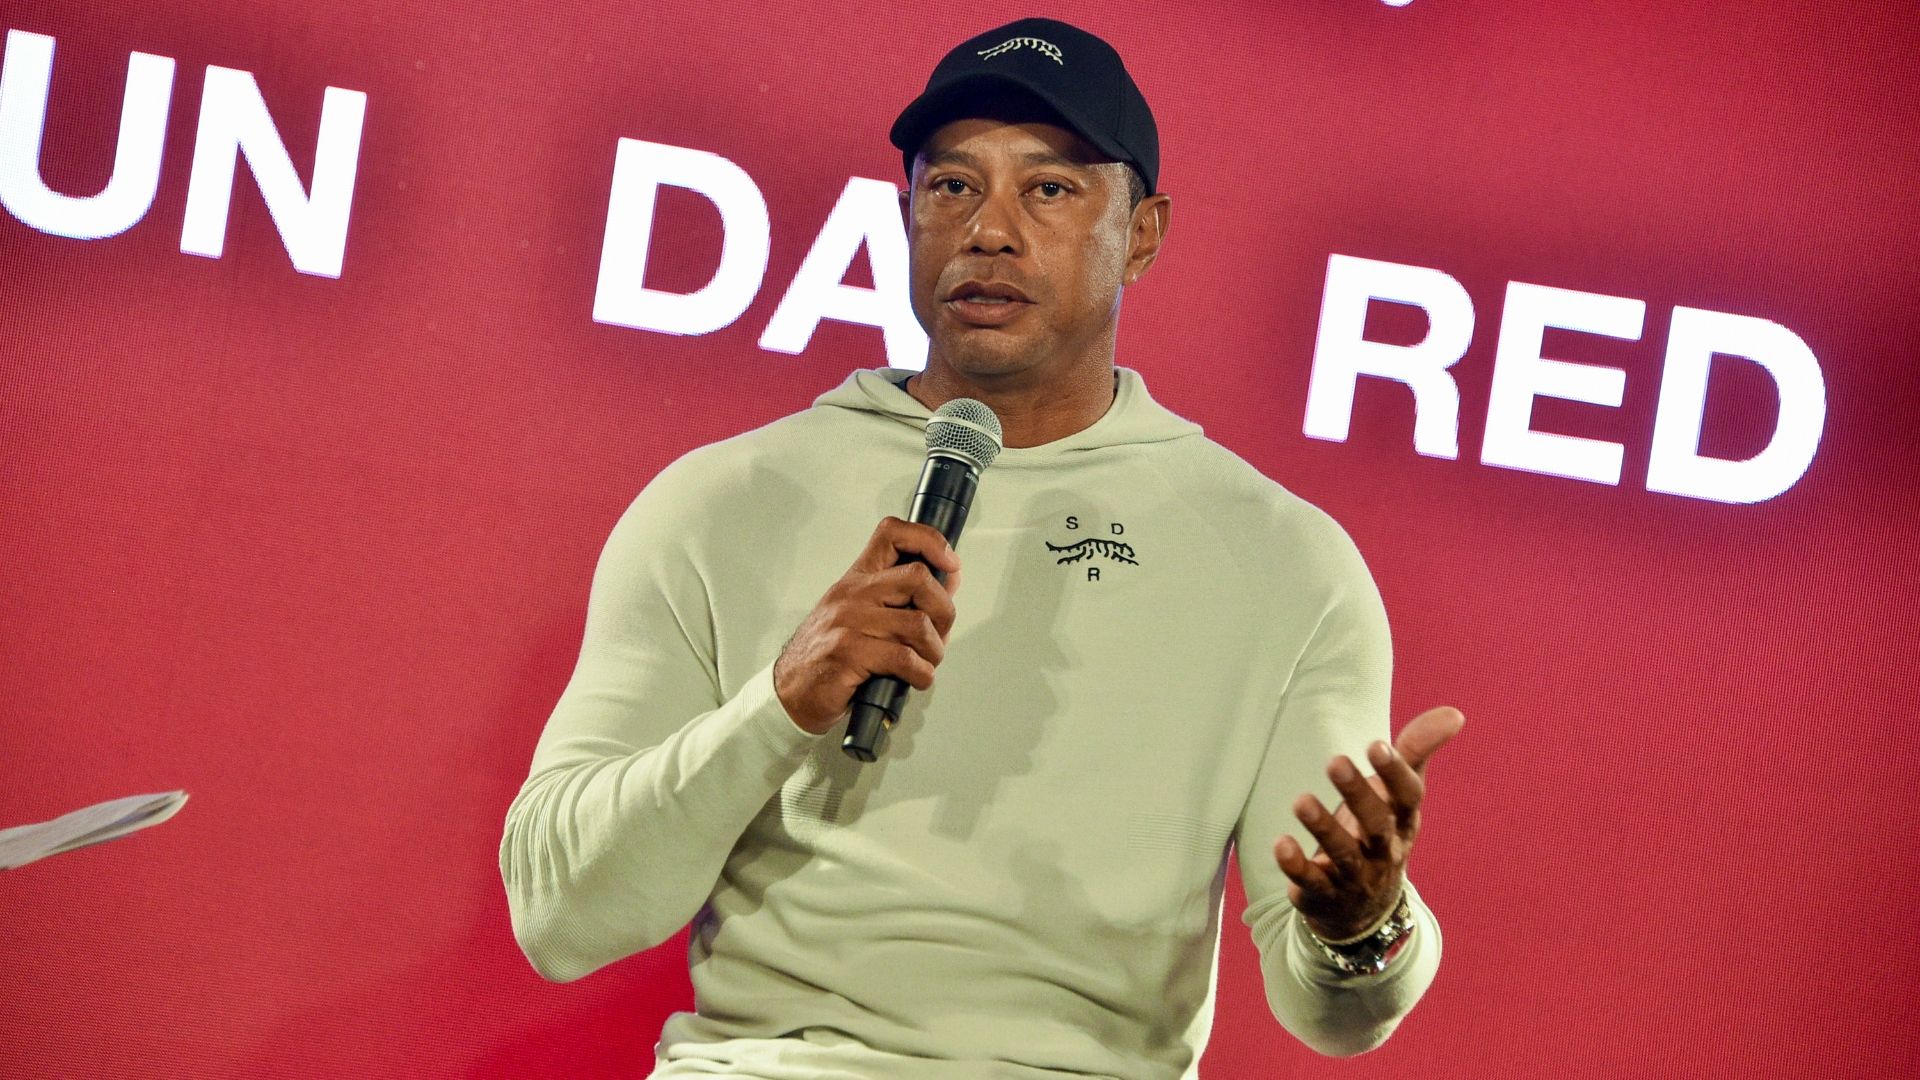 Tiger Woods unveils Sun Day Red, a new apparel brand with